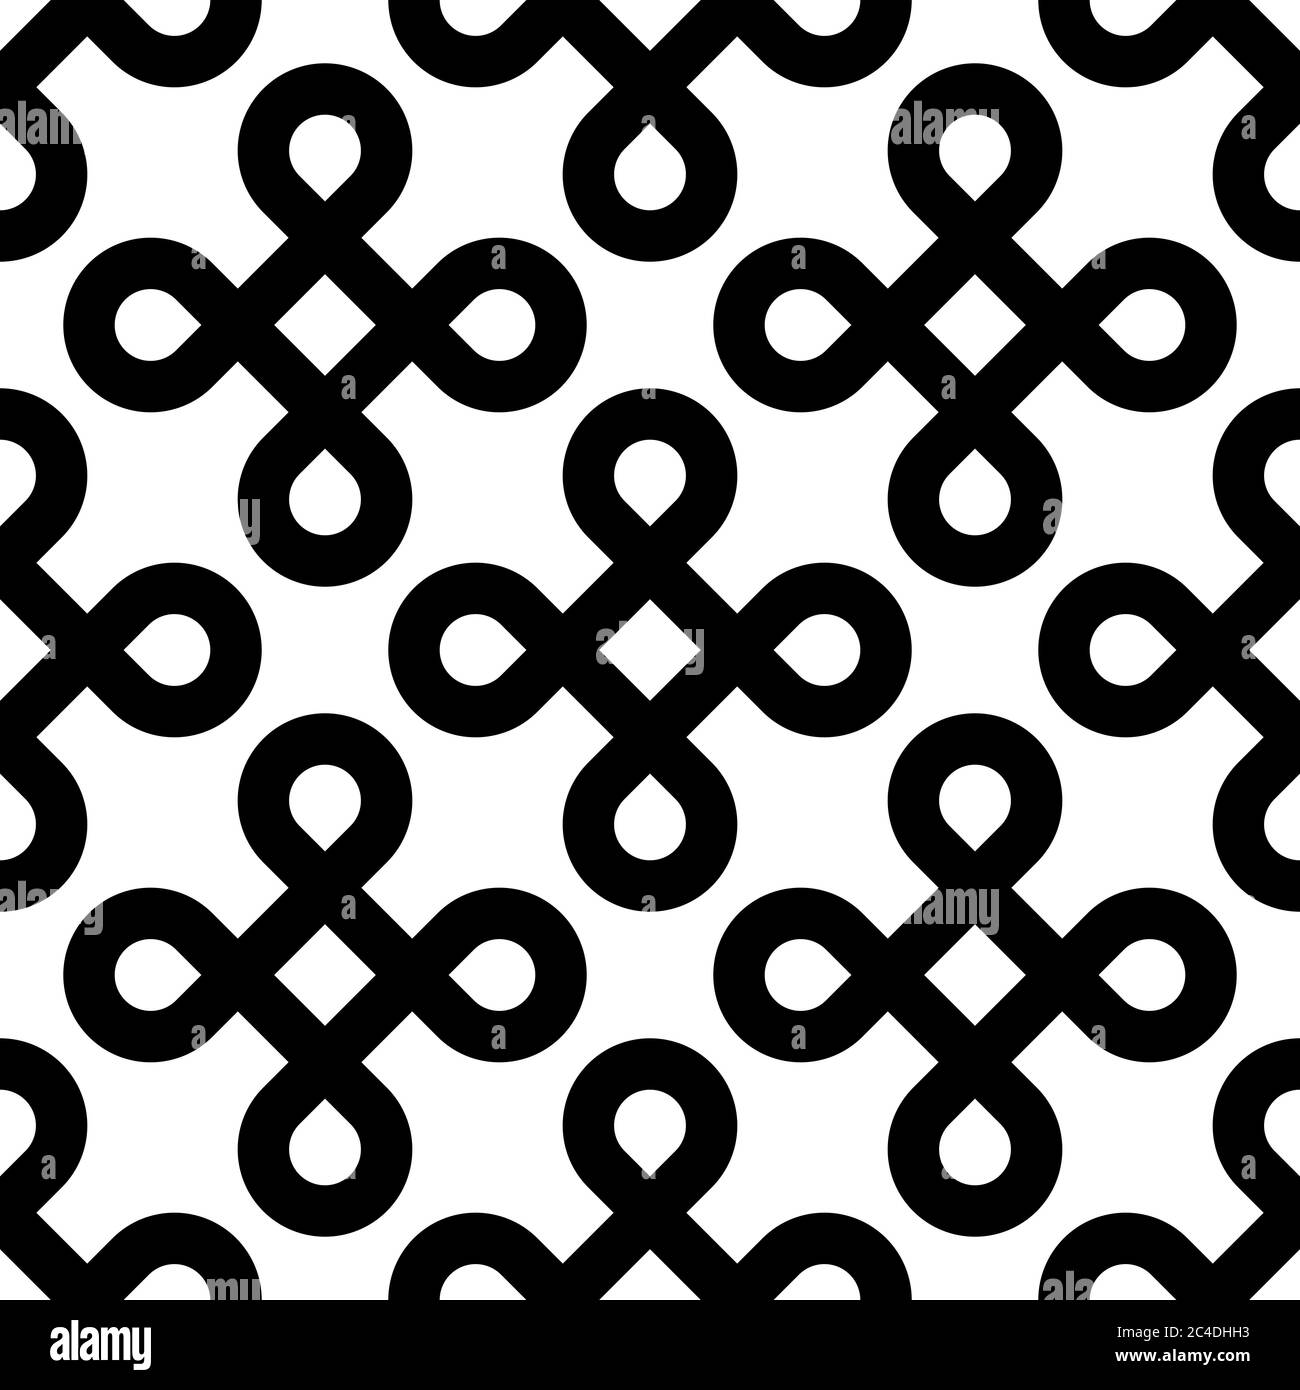 Abstract seamless pattern background. Black bowen knots, or loop square, design elements in diagonal arrangement isolated on white background. Vector illustration. Stock Vector